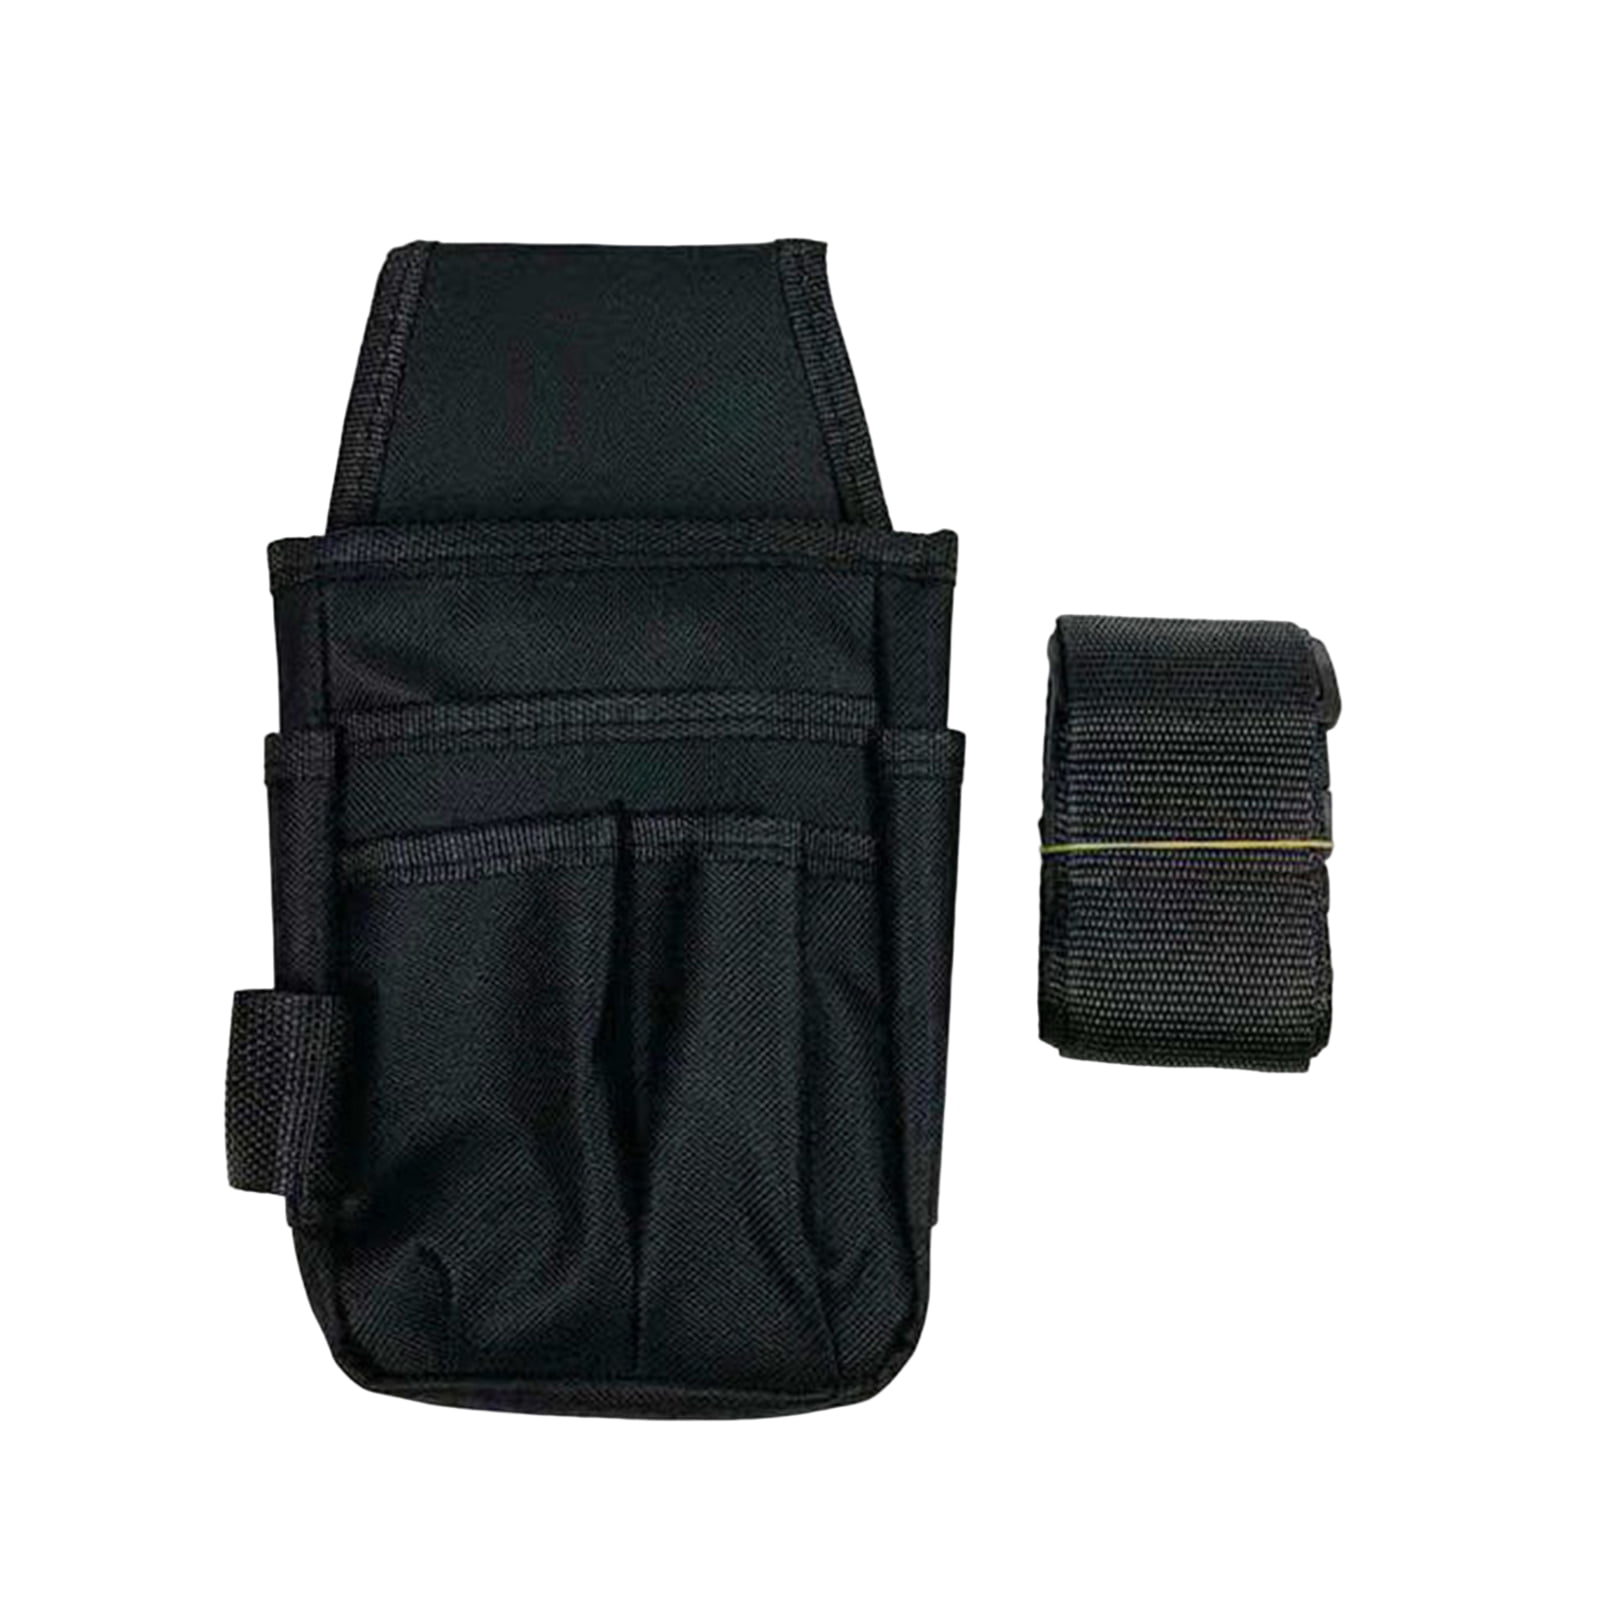 Tool Belt Pouches, 5-Pockets Single Side Tool Belt Pouch, Tool pouch belt,  Utility Belt Bag, Tool be…See more Tool Belt Pouches, 5-Pockets Single Side